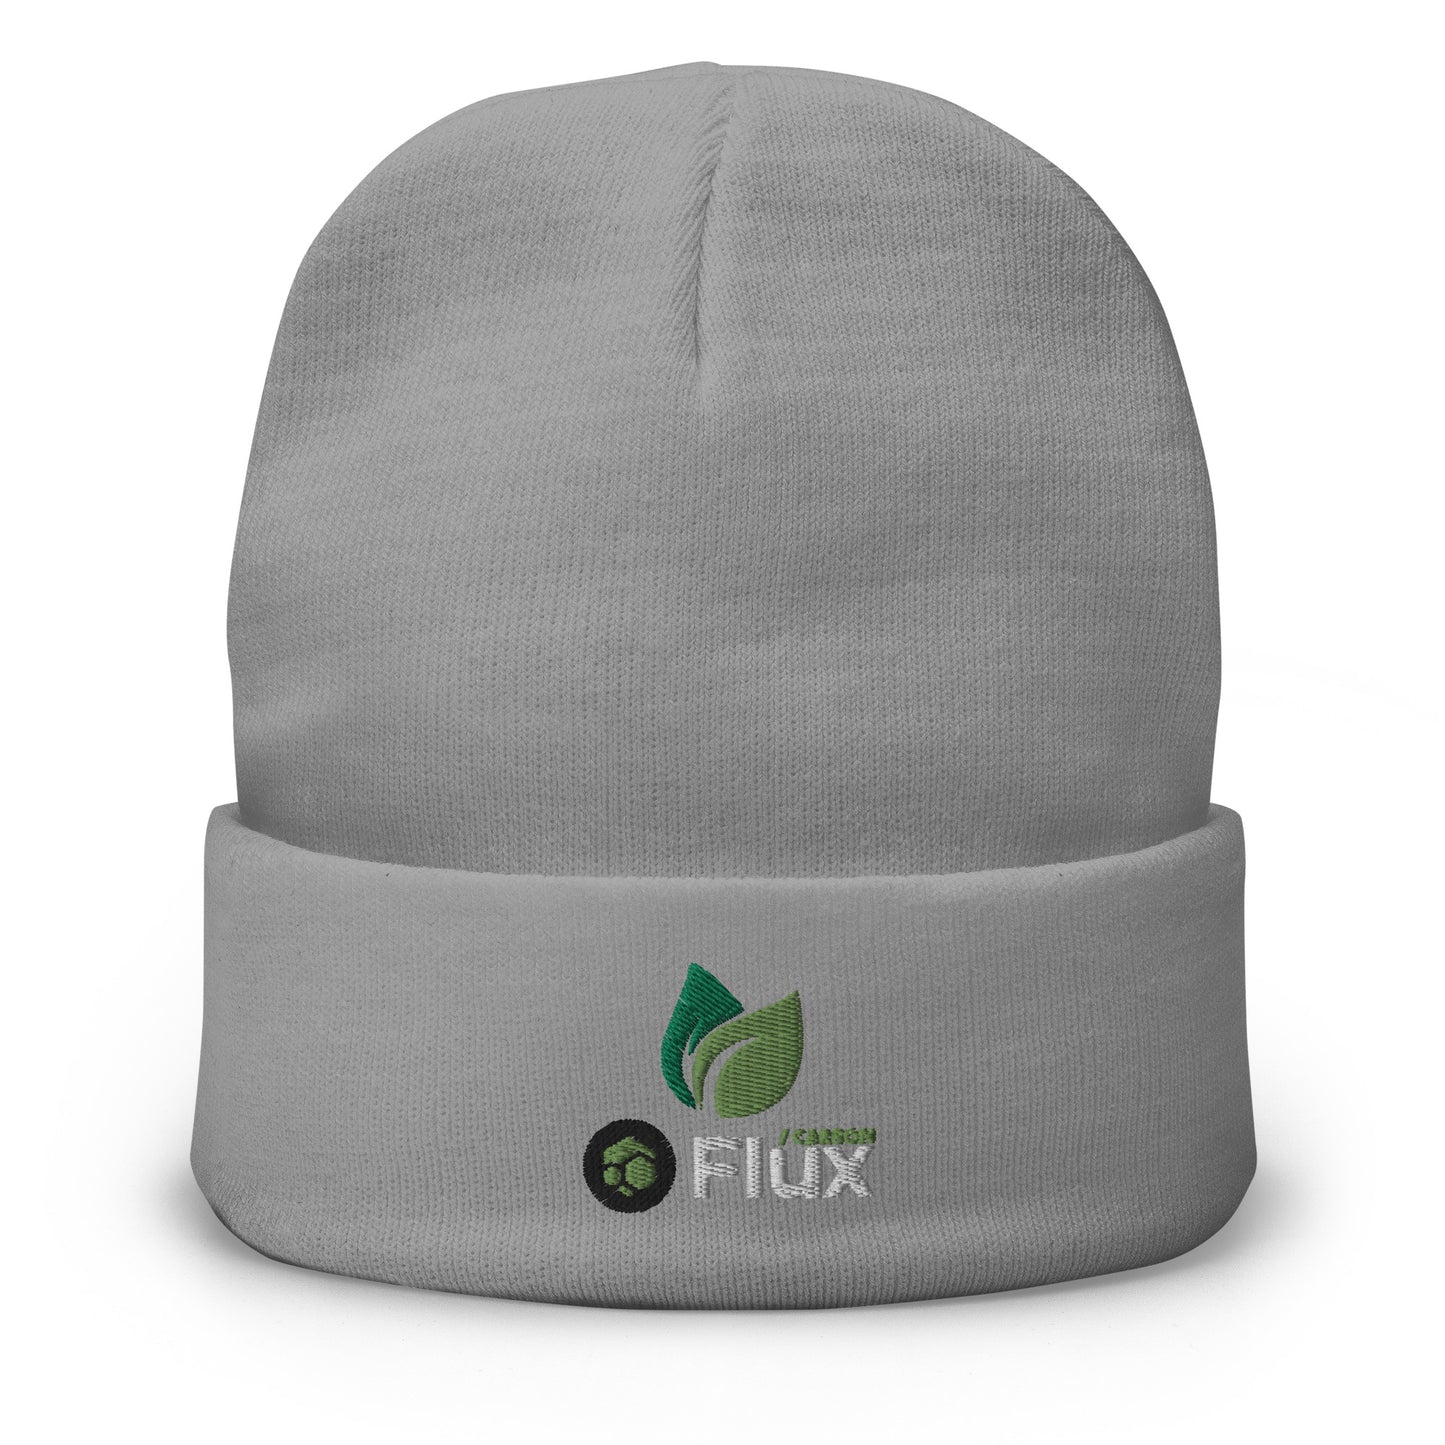 FluxCarbon Embroidered Beanie